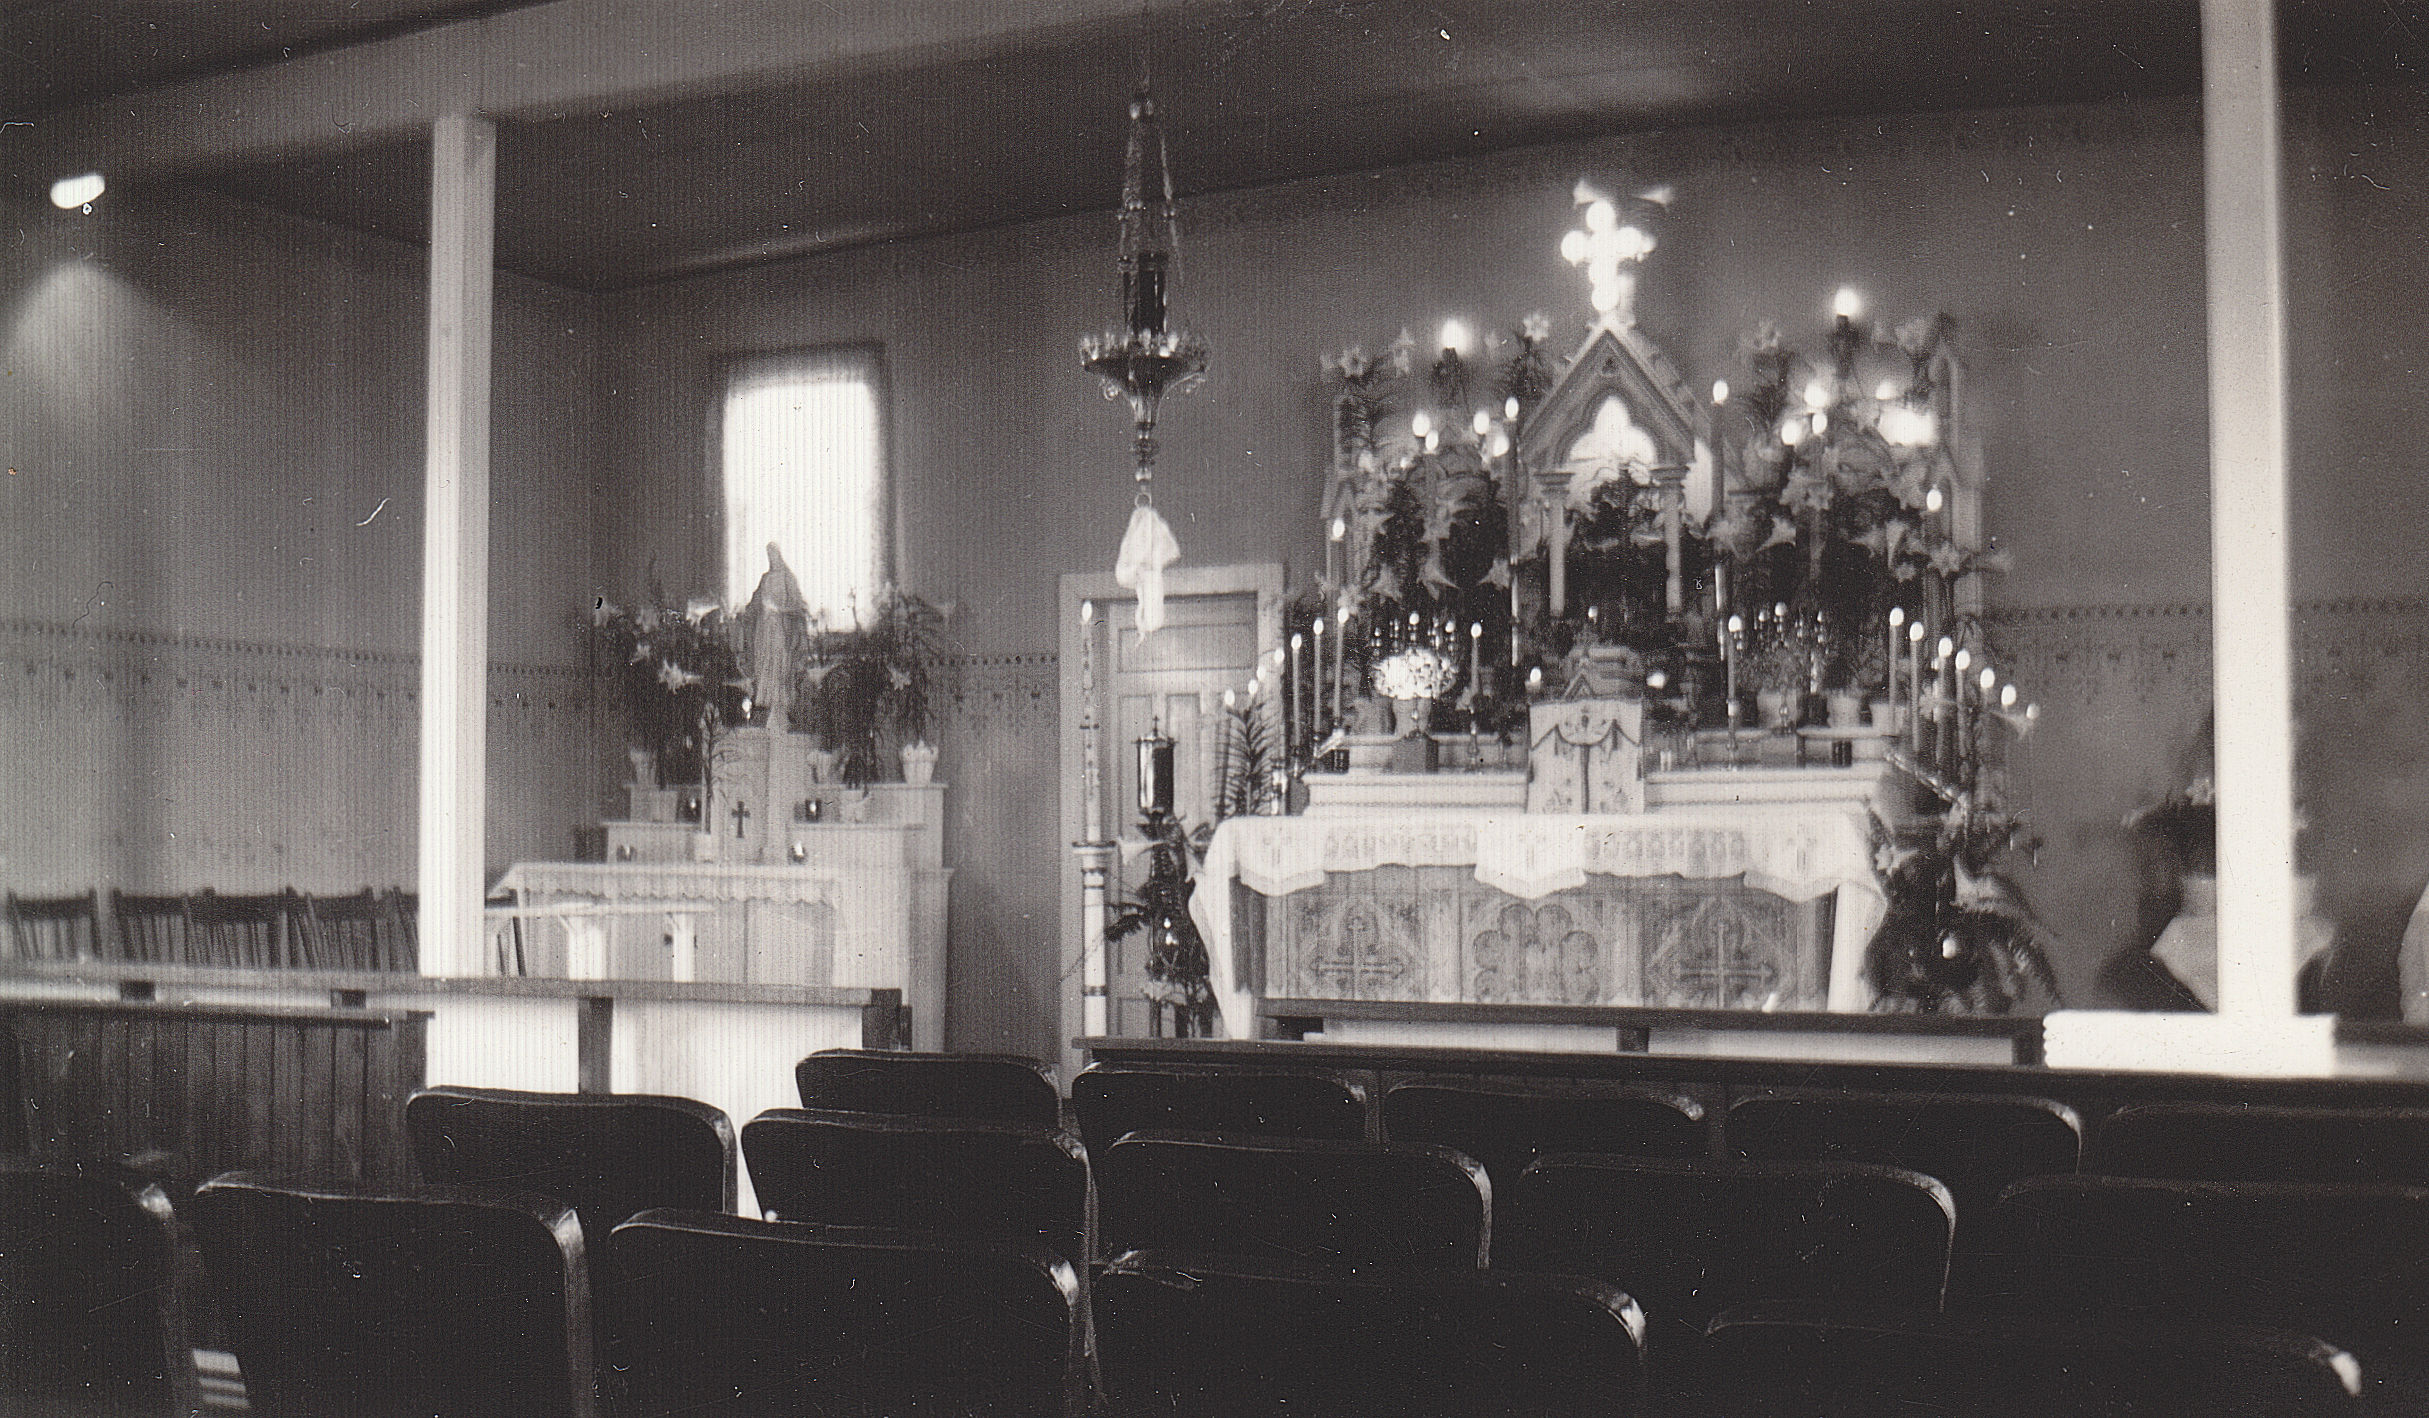 Photo showing the interior of the original church with its main altar and theatre seats